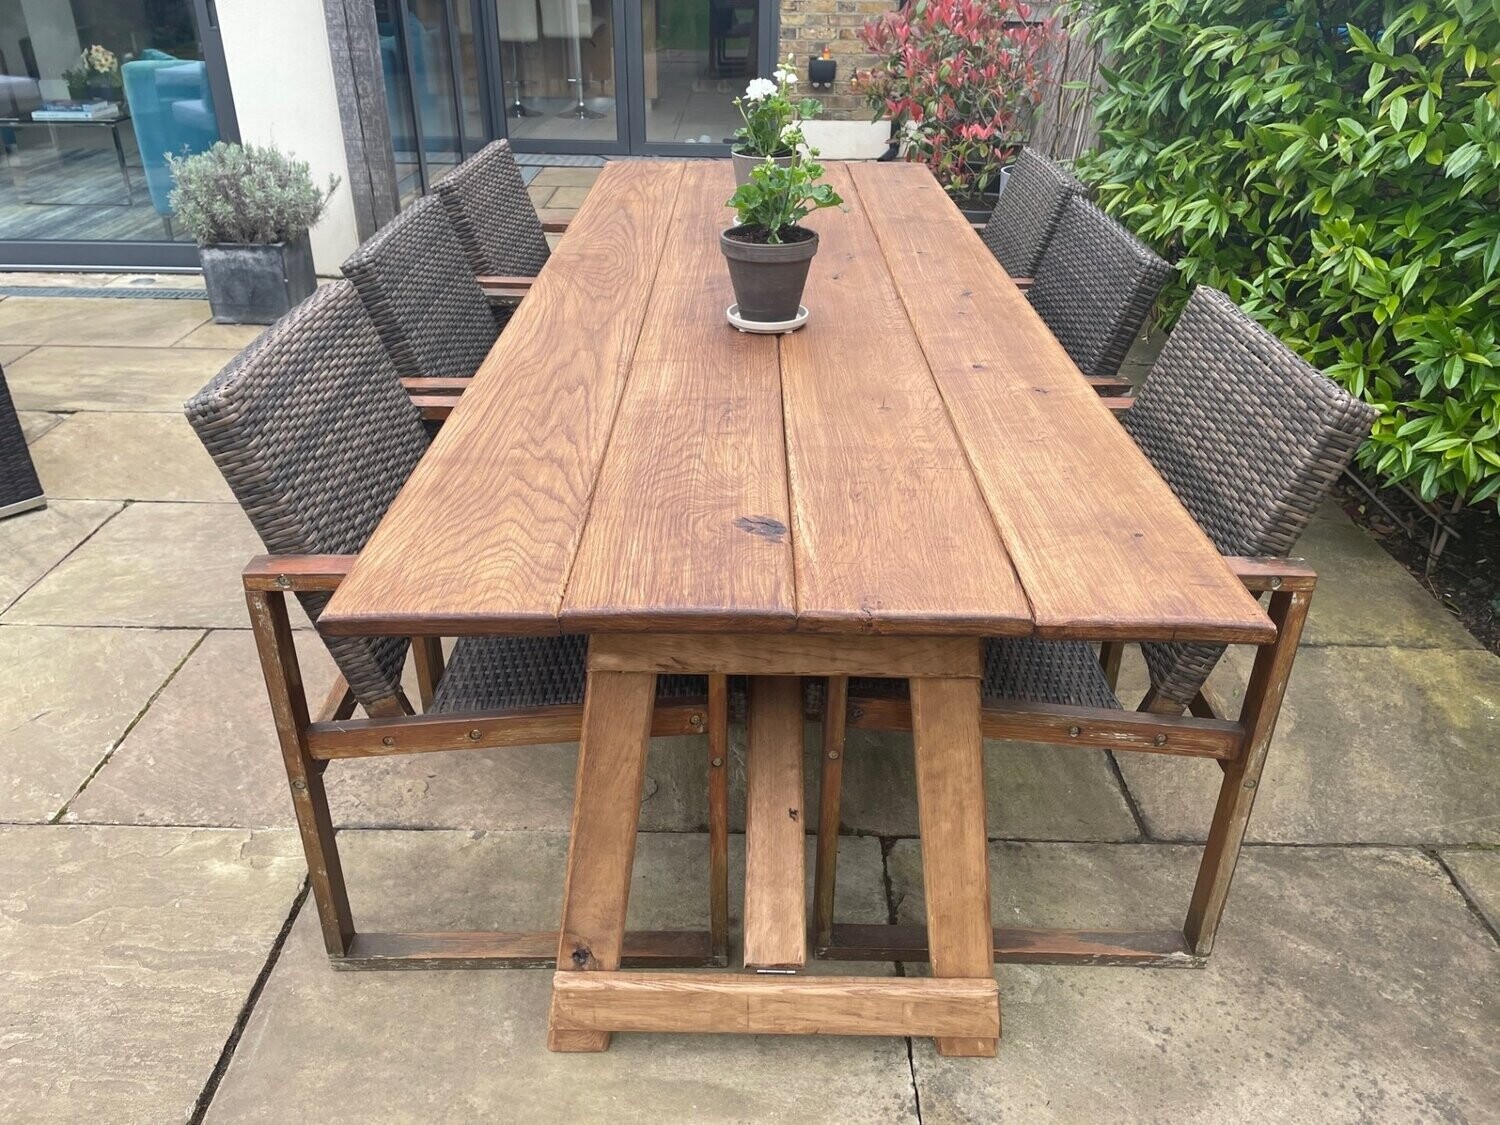 8ft 4 plank outdoor garden Solid Oak 4 plank folding Events Dining Table  2.4m x 90cm folds flat for storage brass fixings Hand Made in UK Indoor Wax  coated